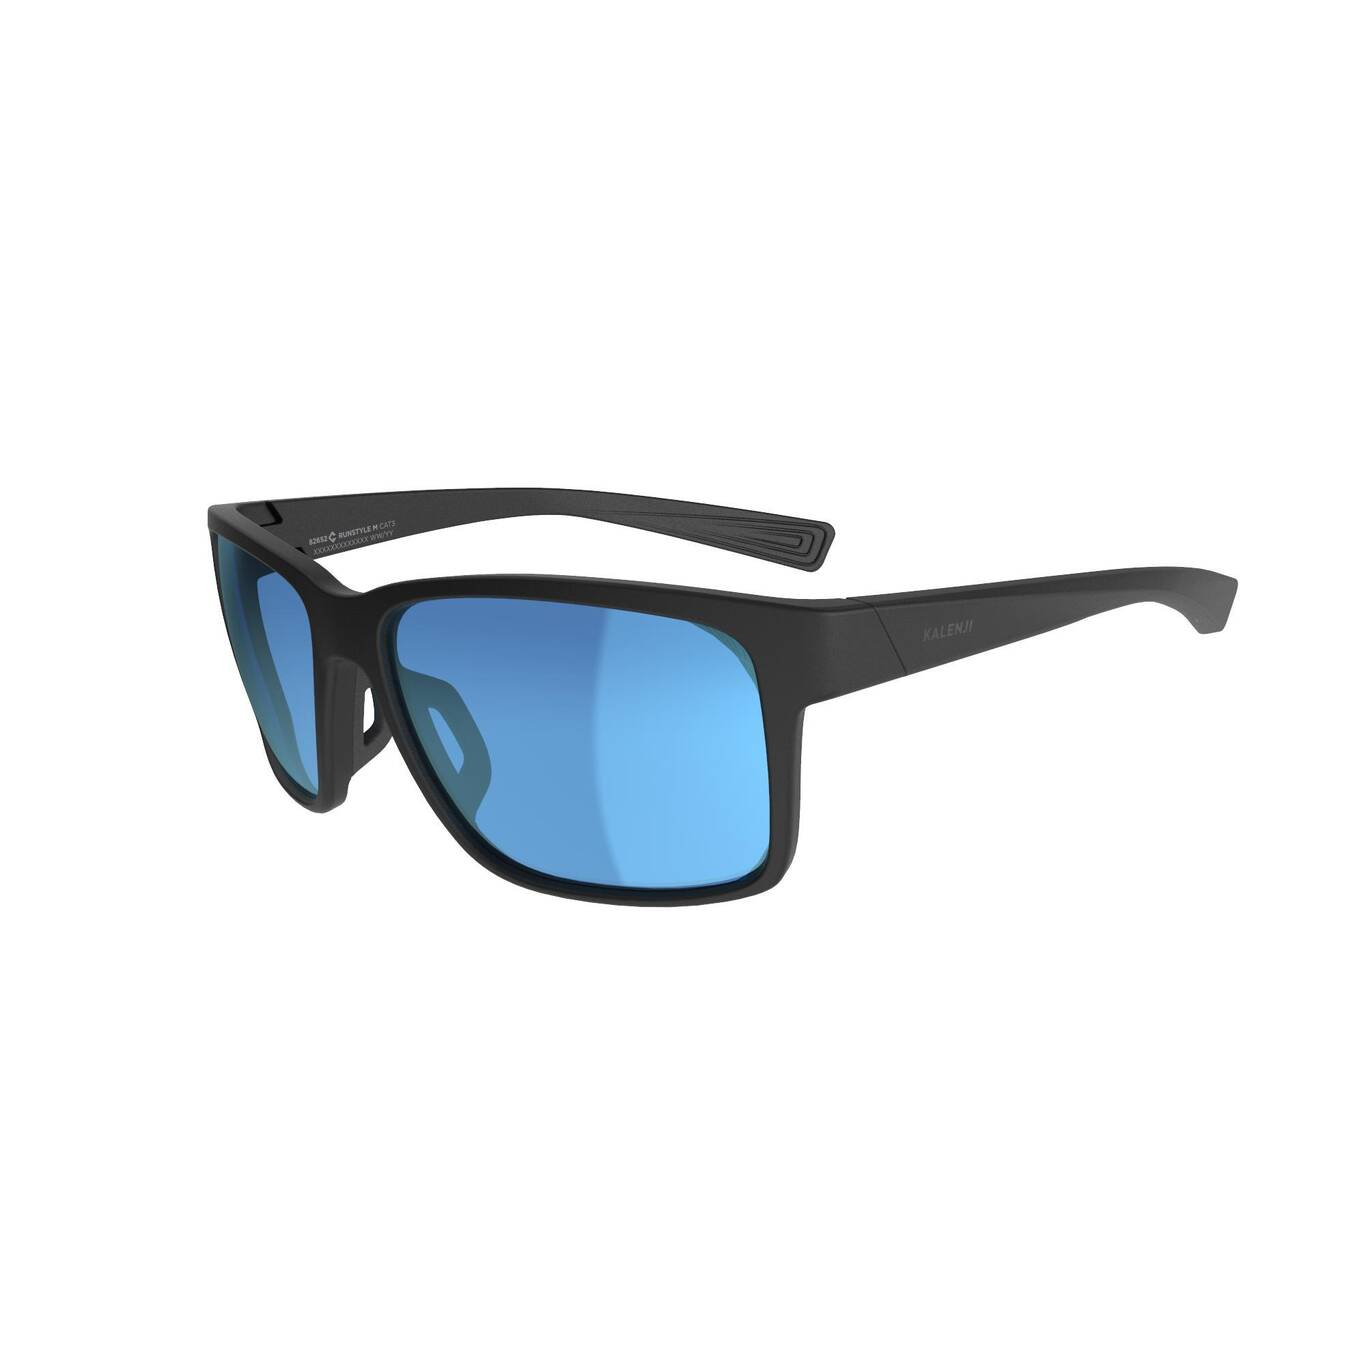 Adult Running Glasses Runstyle 2 Category 3 - Asia black blue